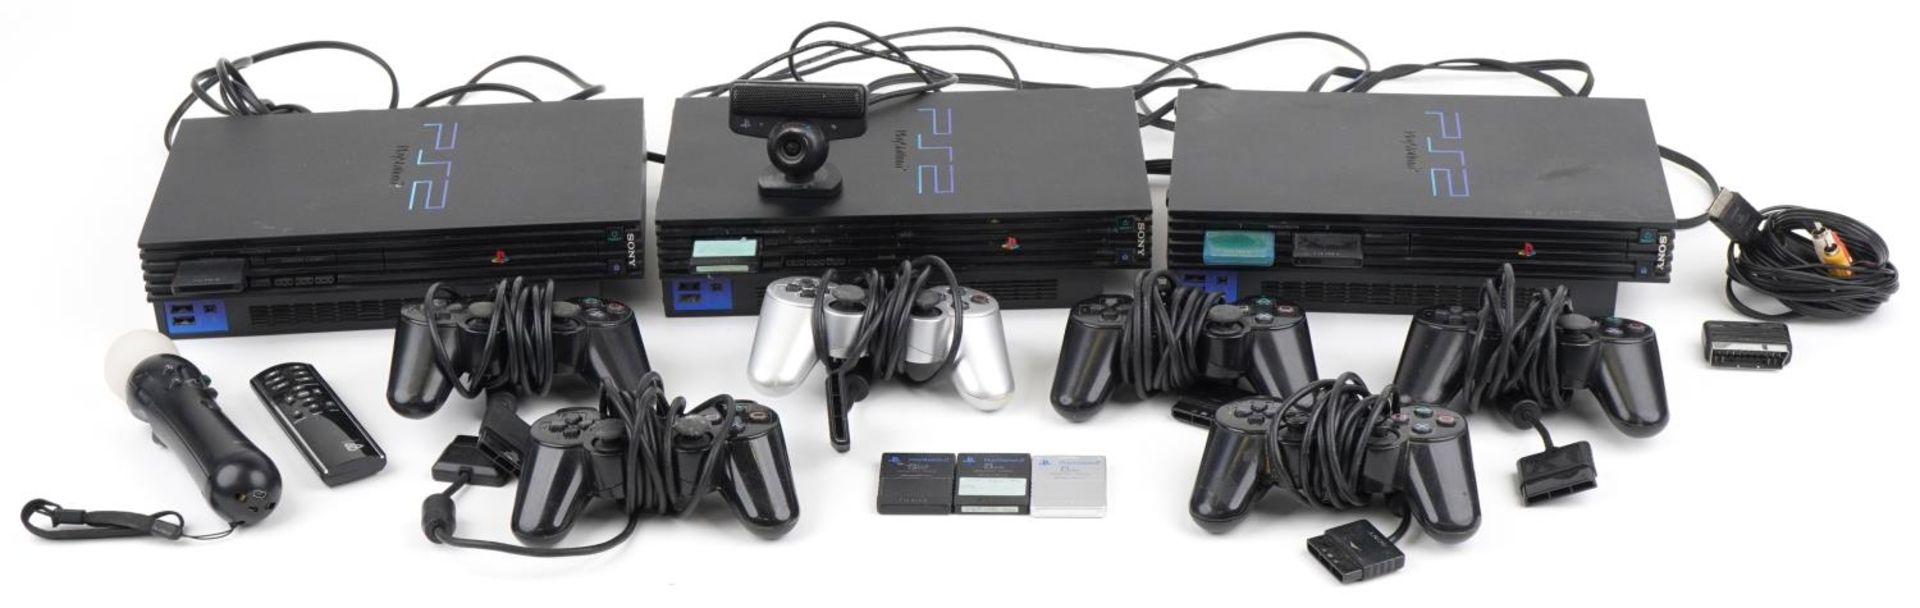 Three PlayStation 2 games consoles with controllers and accessories : For further information on